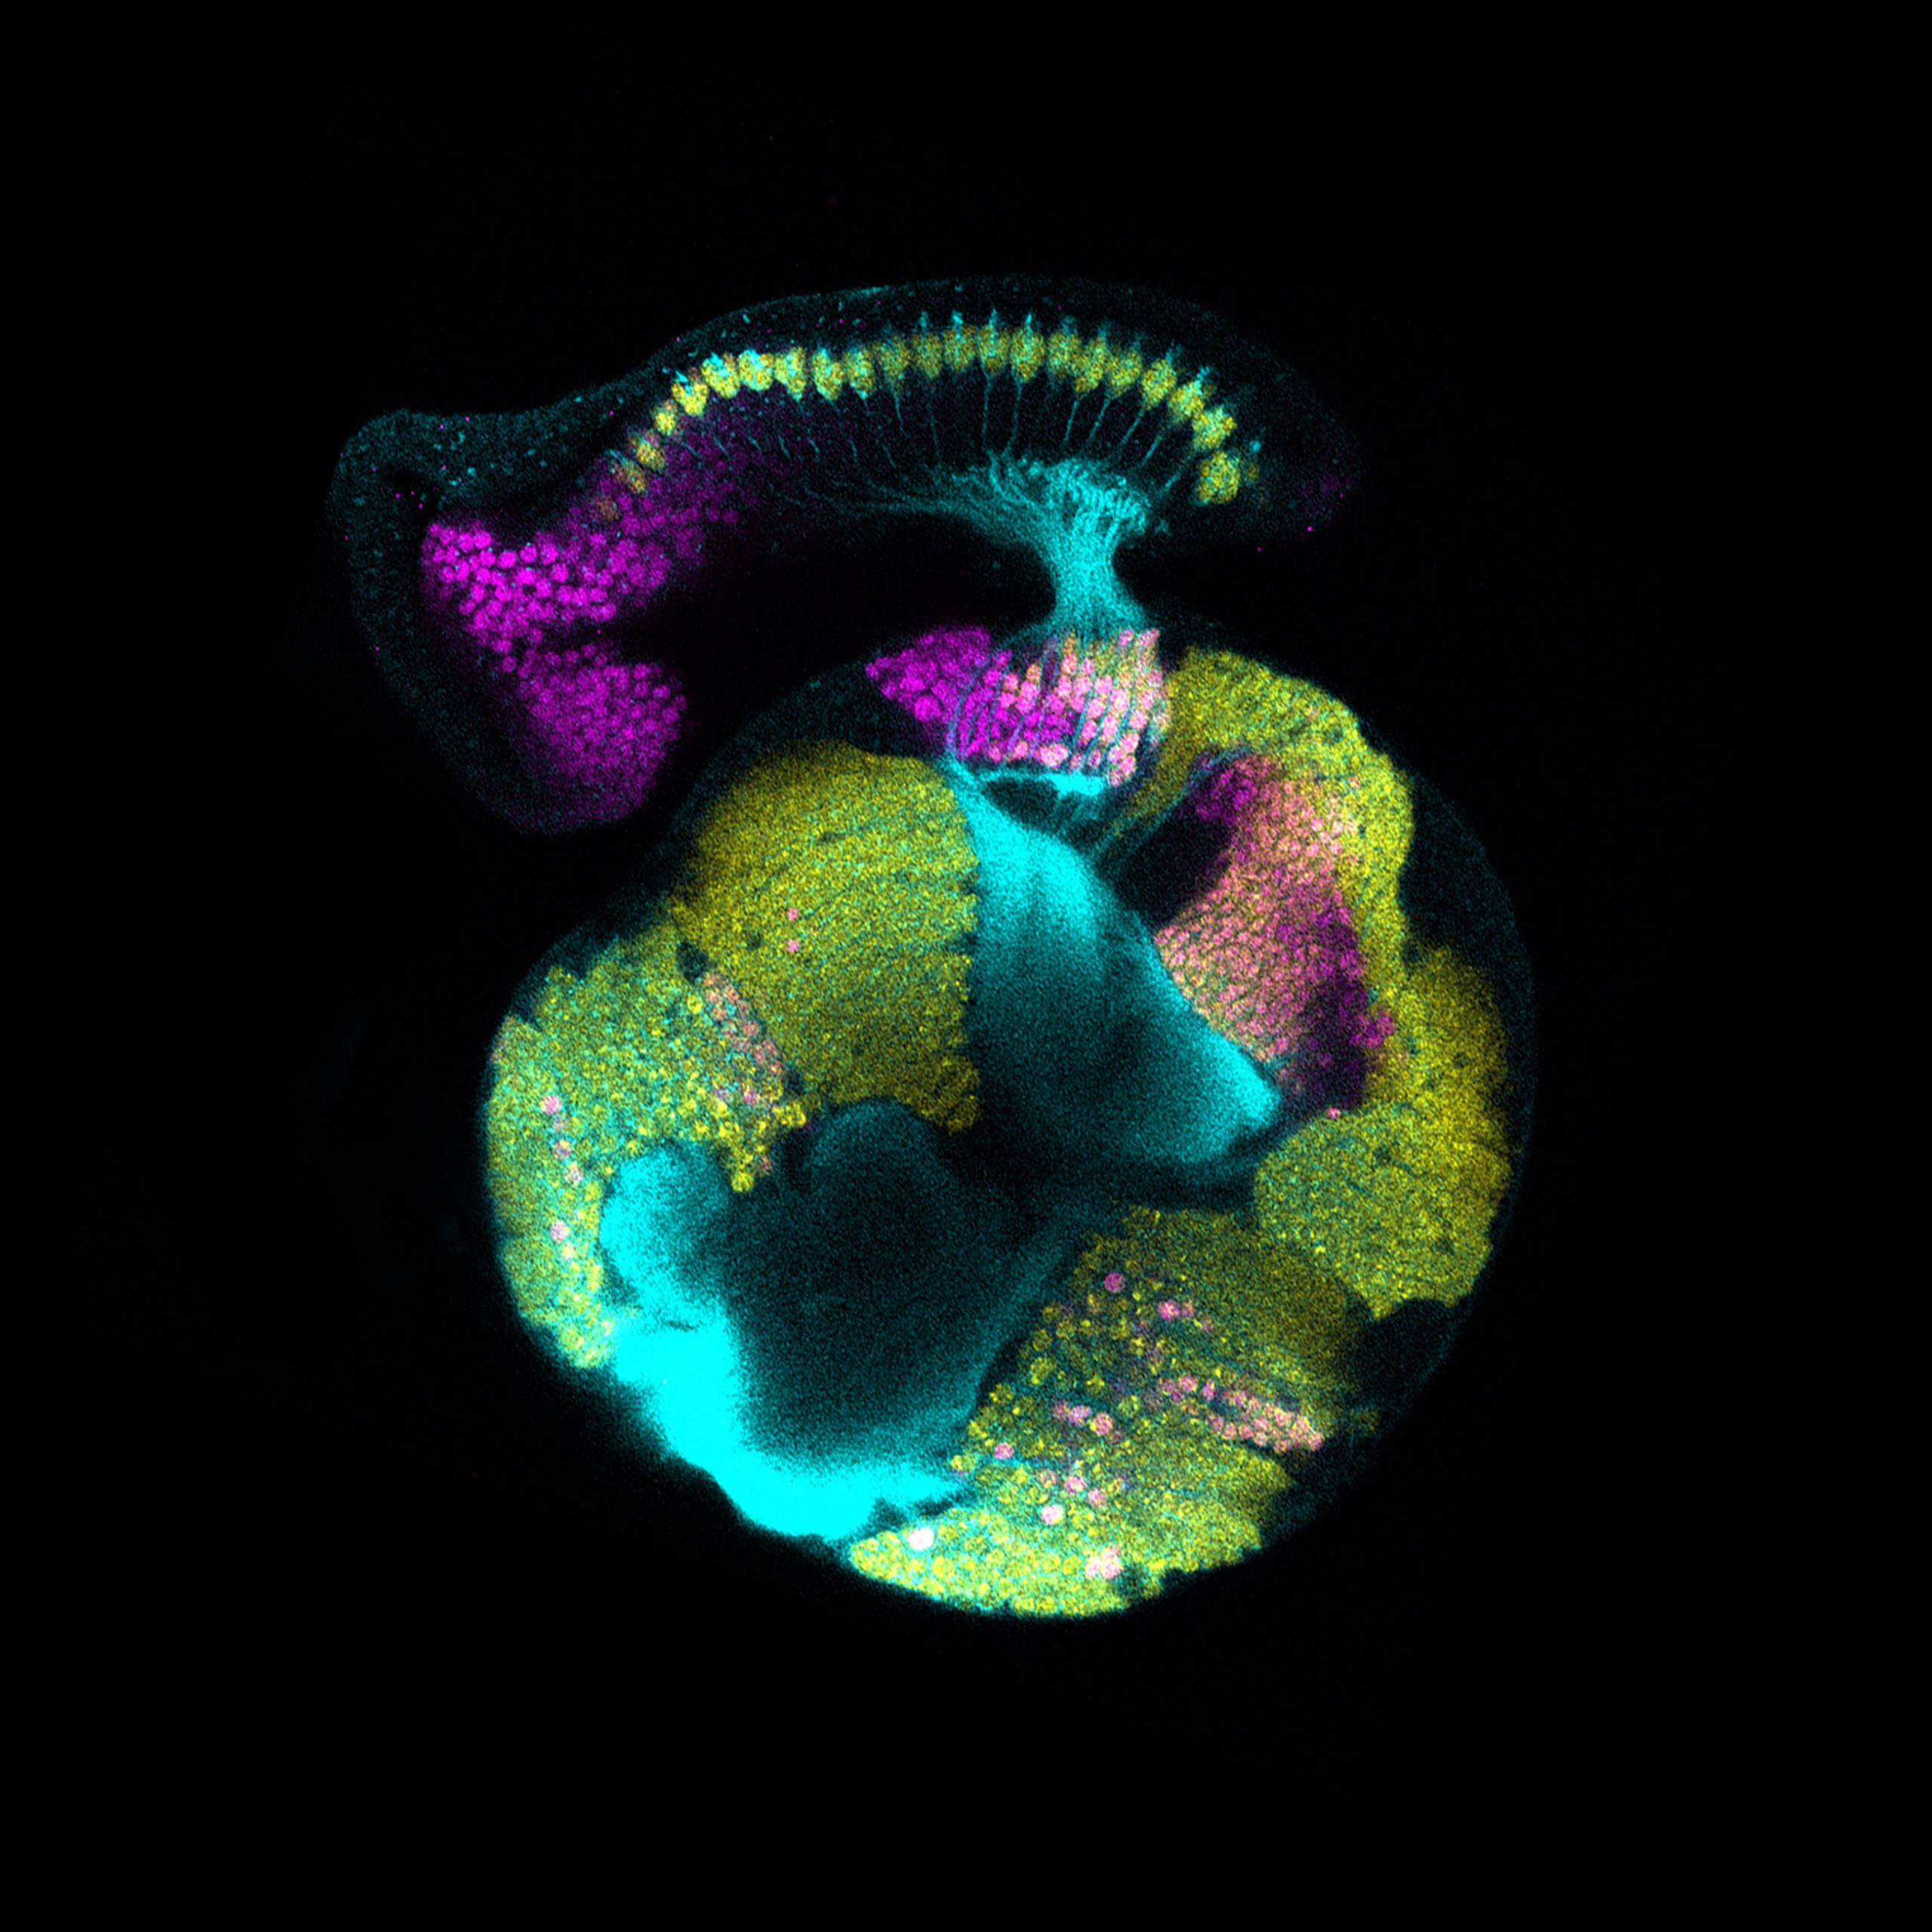 A confocal micrograph of a developing fruit fly visual system.